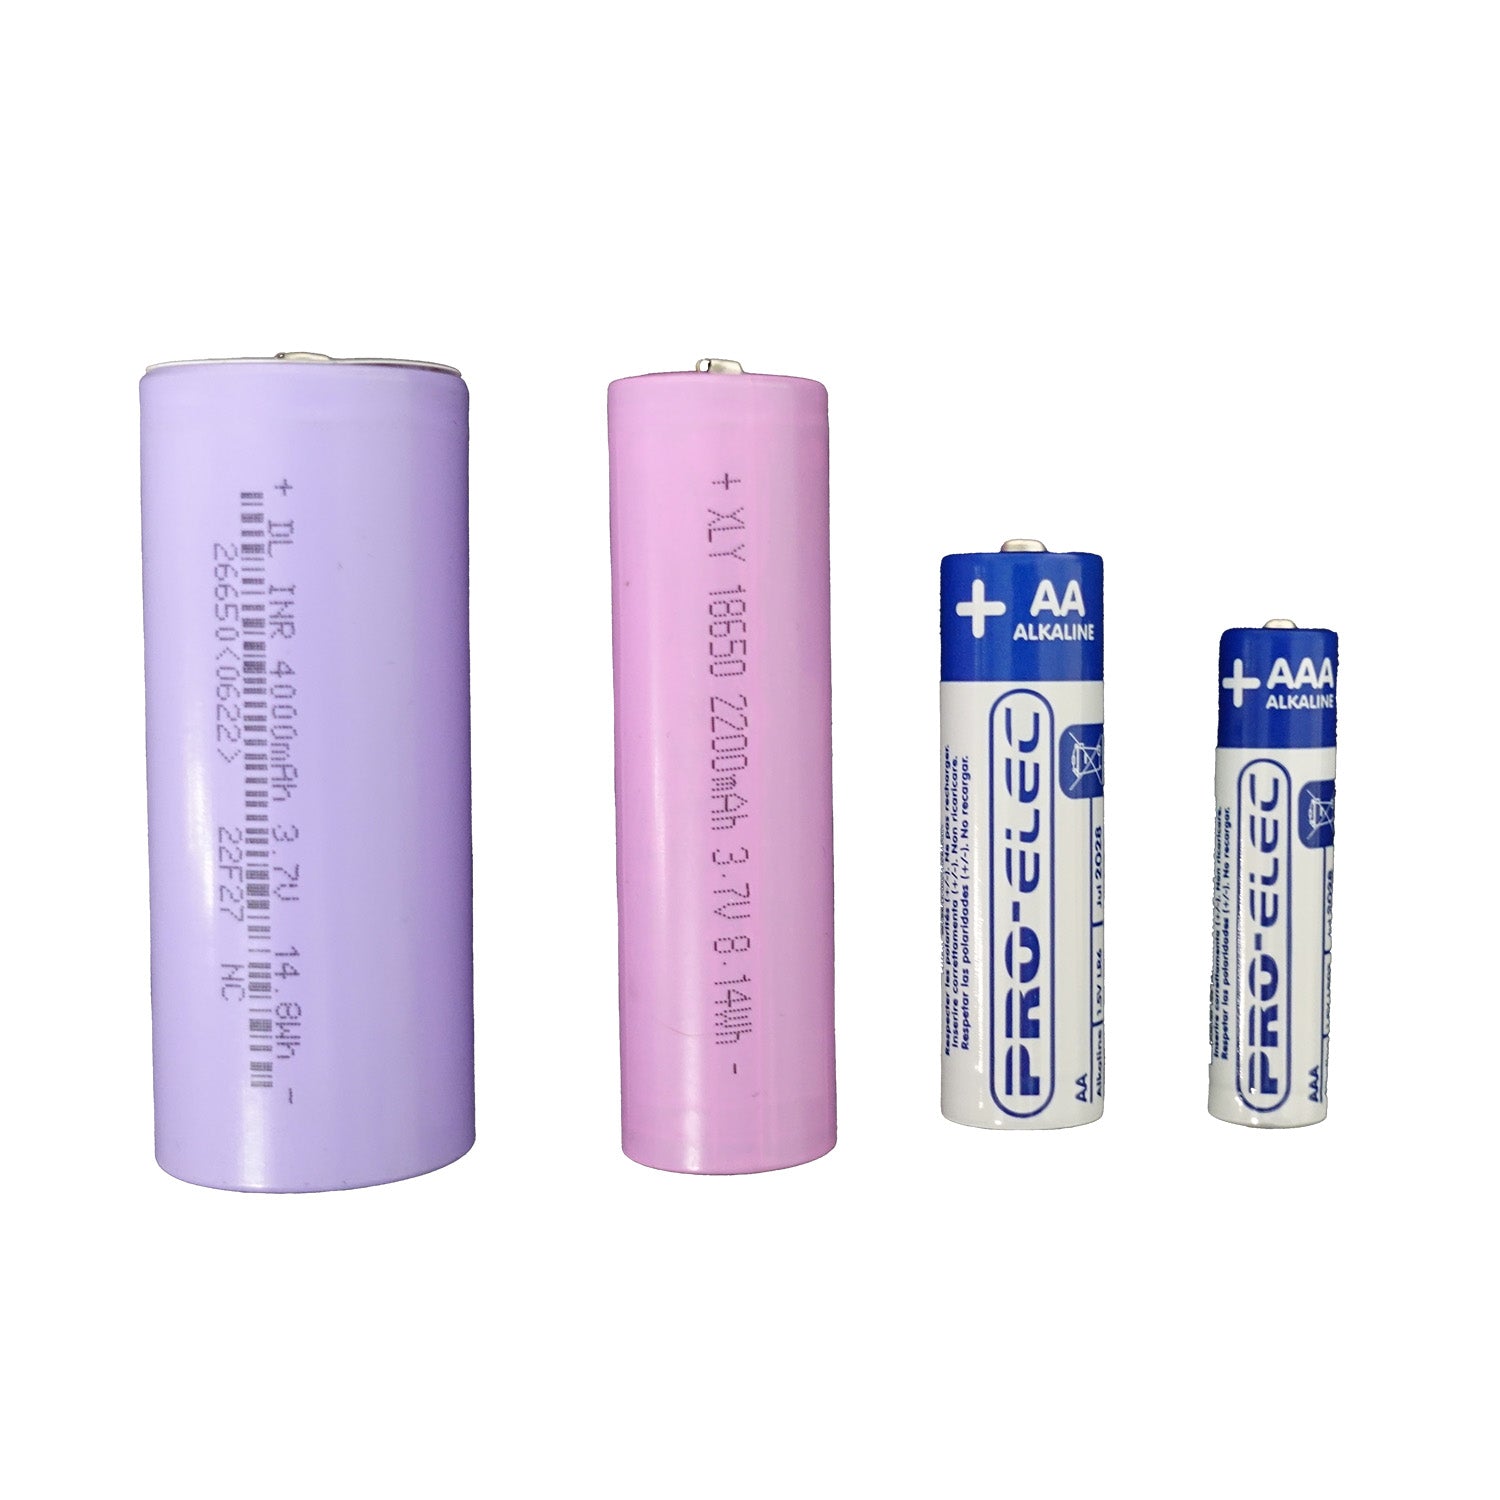 Battery, rechargeable lithium 18650